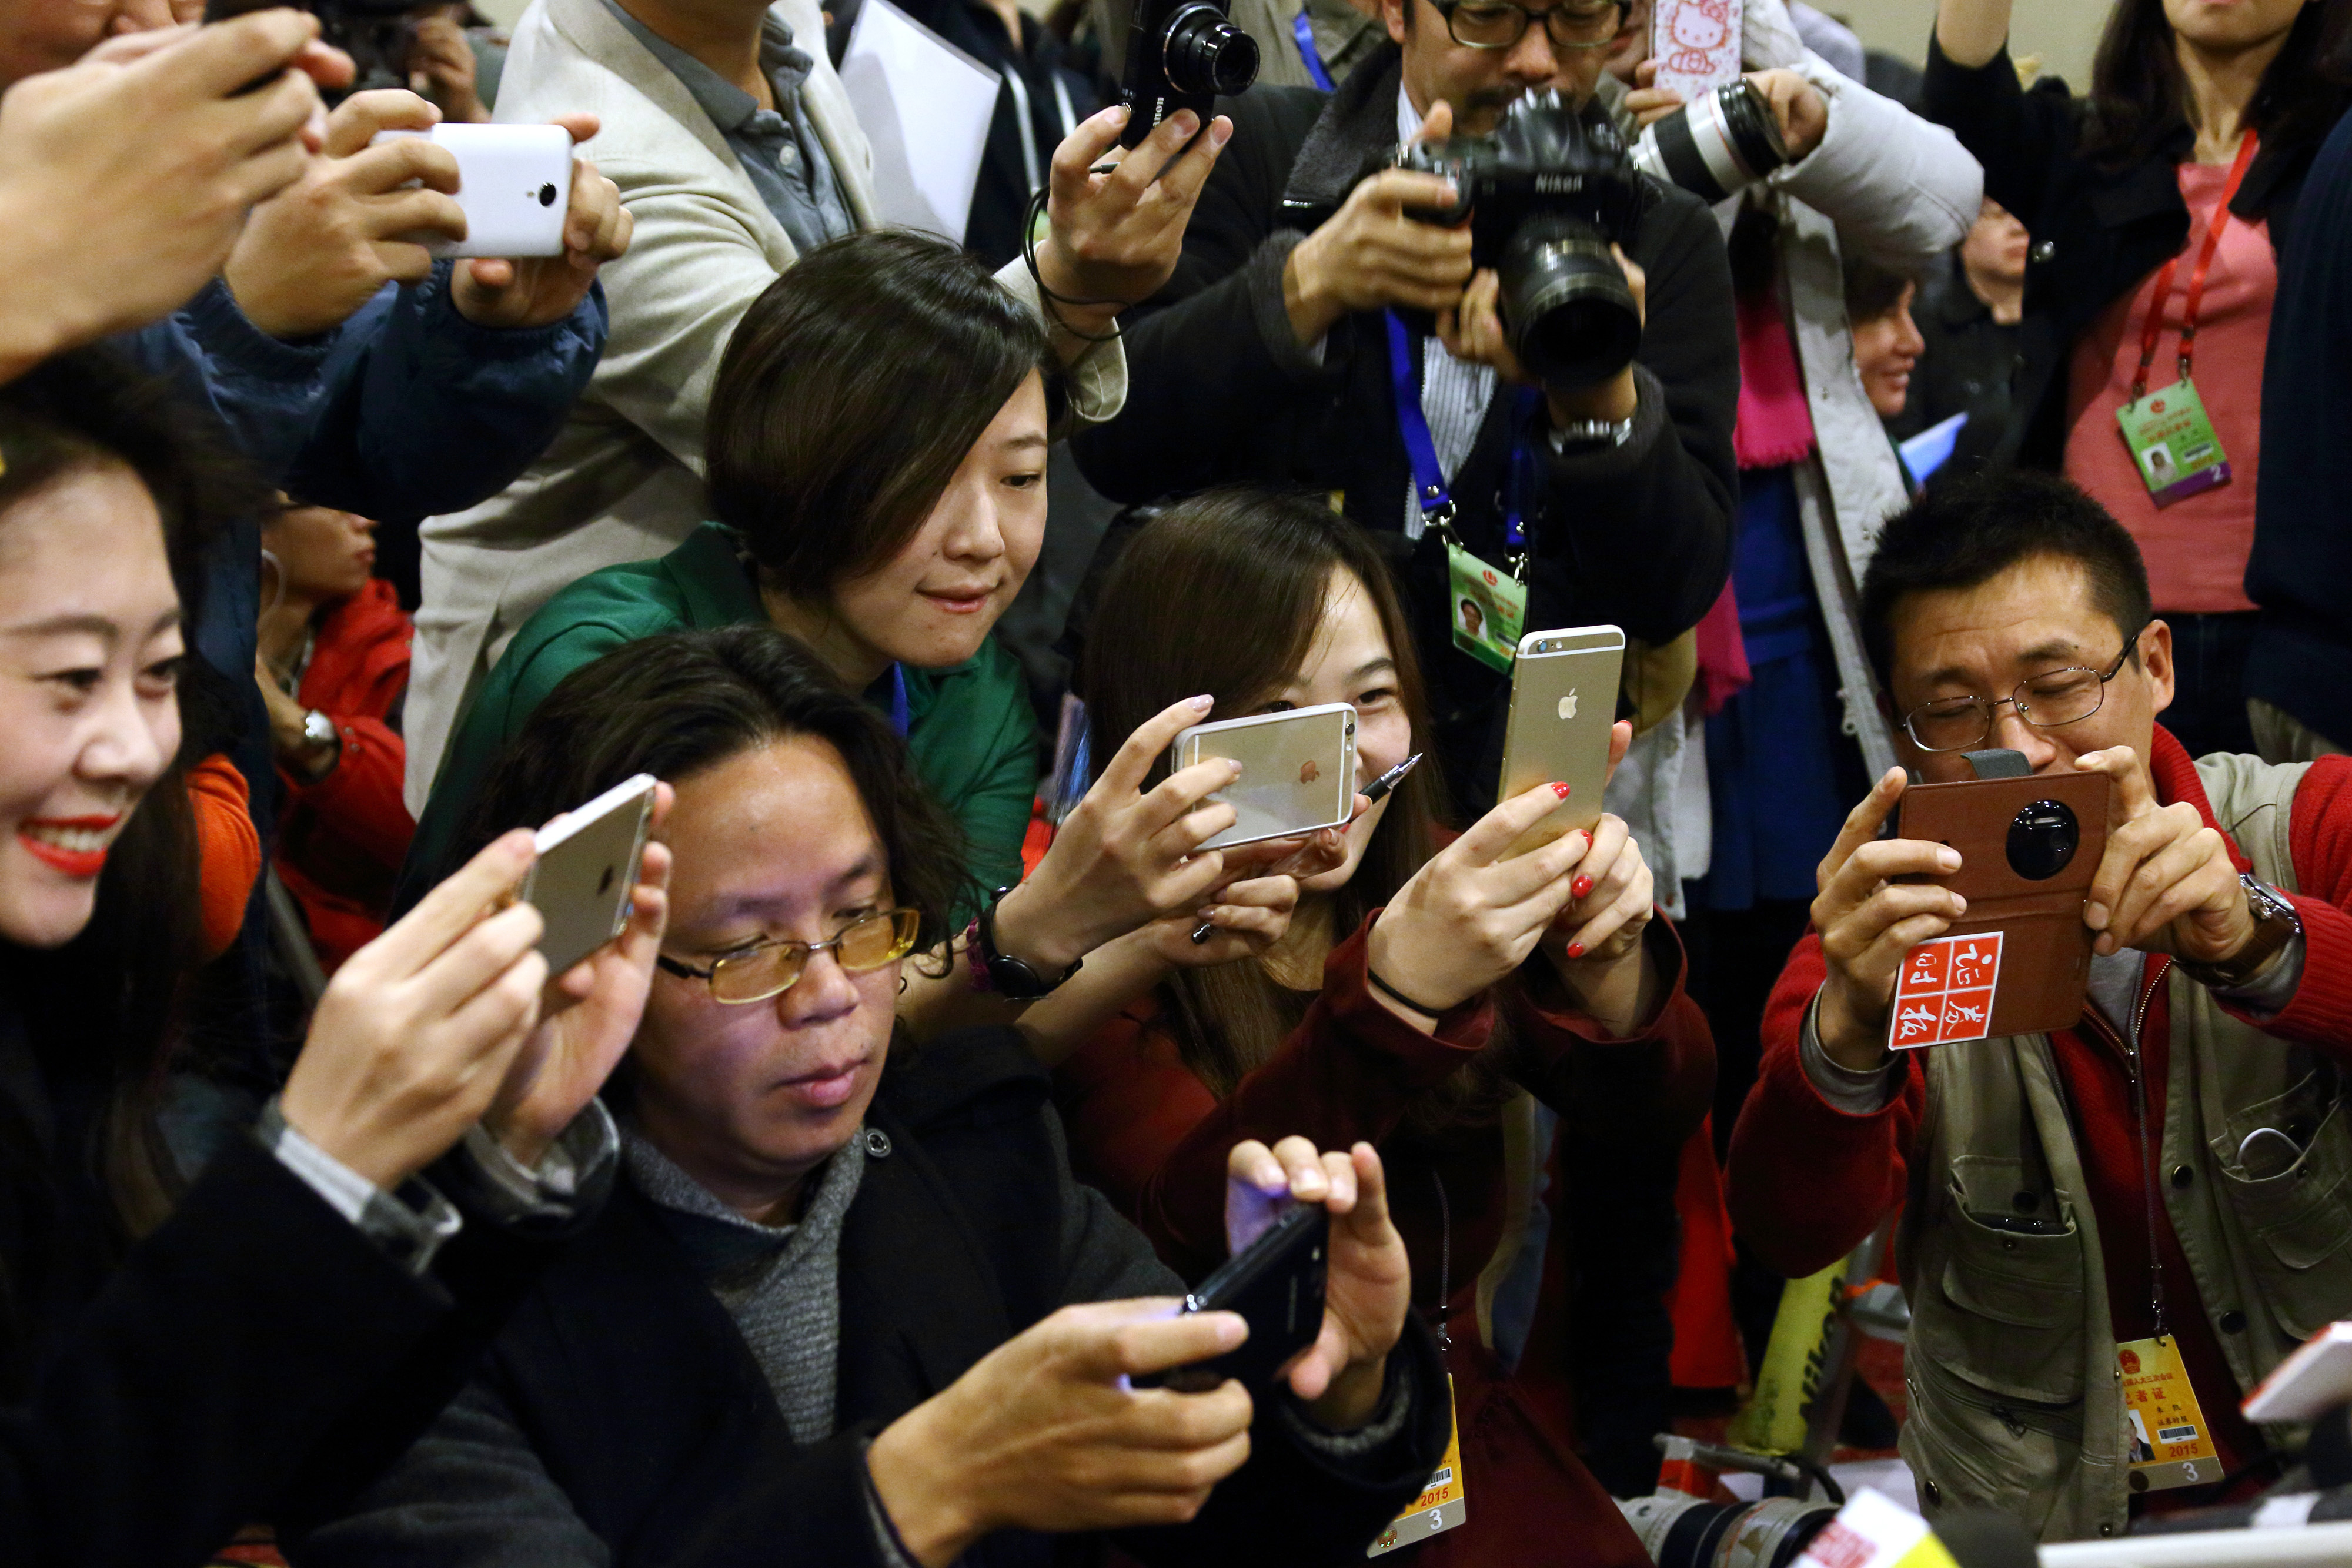 The surging valuations of companies like Alibaba have raised concerns of a tech bubble in China. Photo: Bloomberg